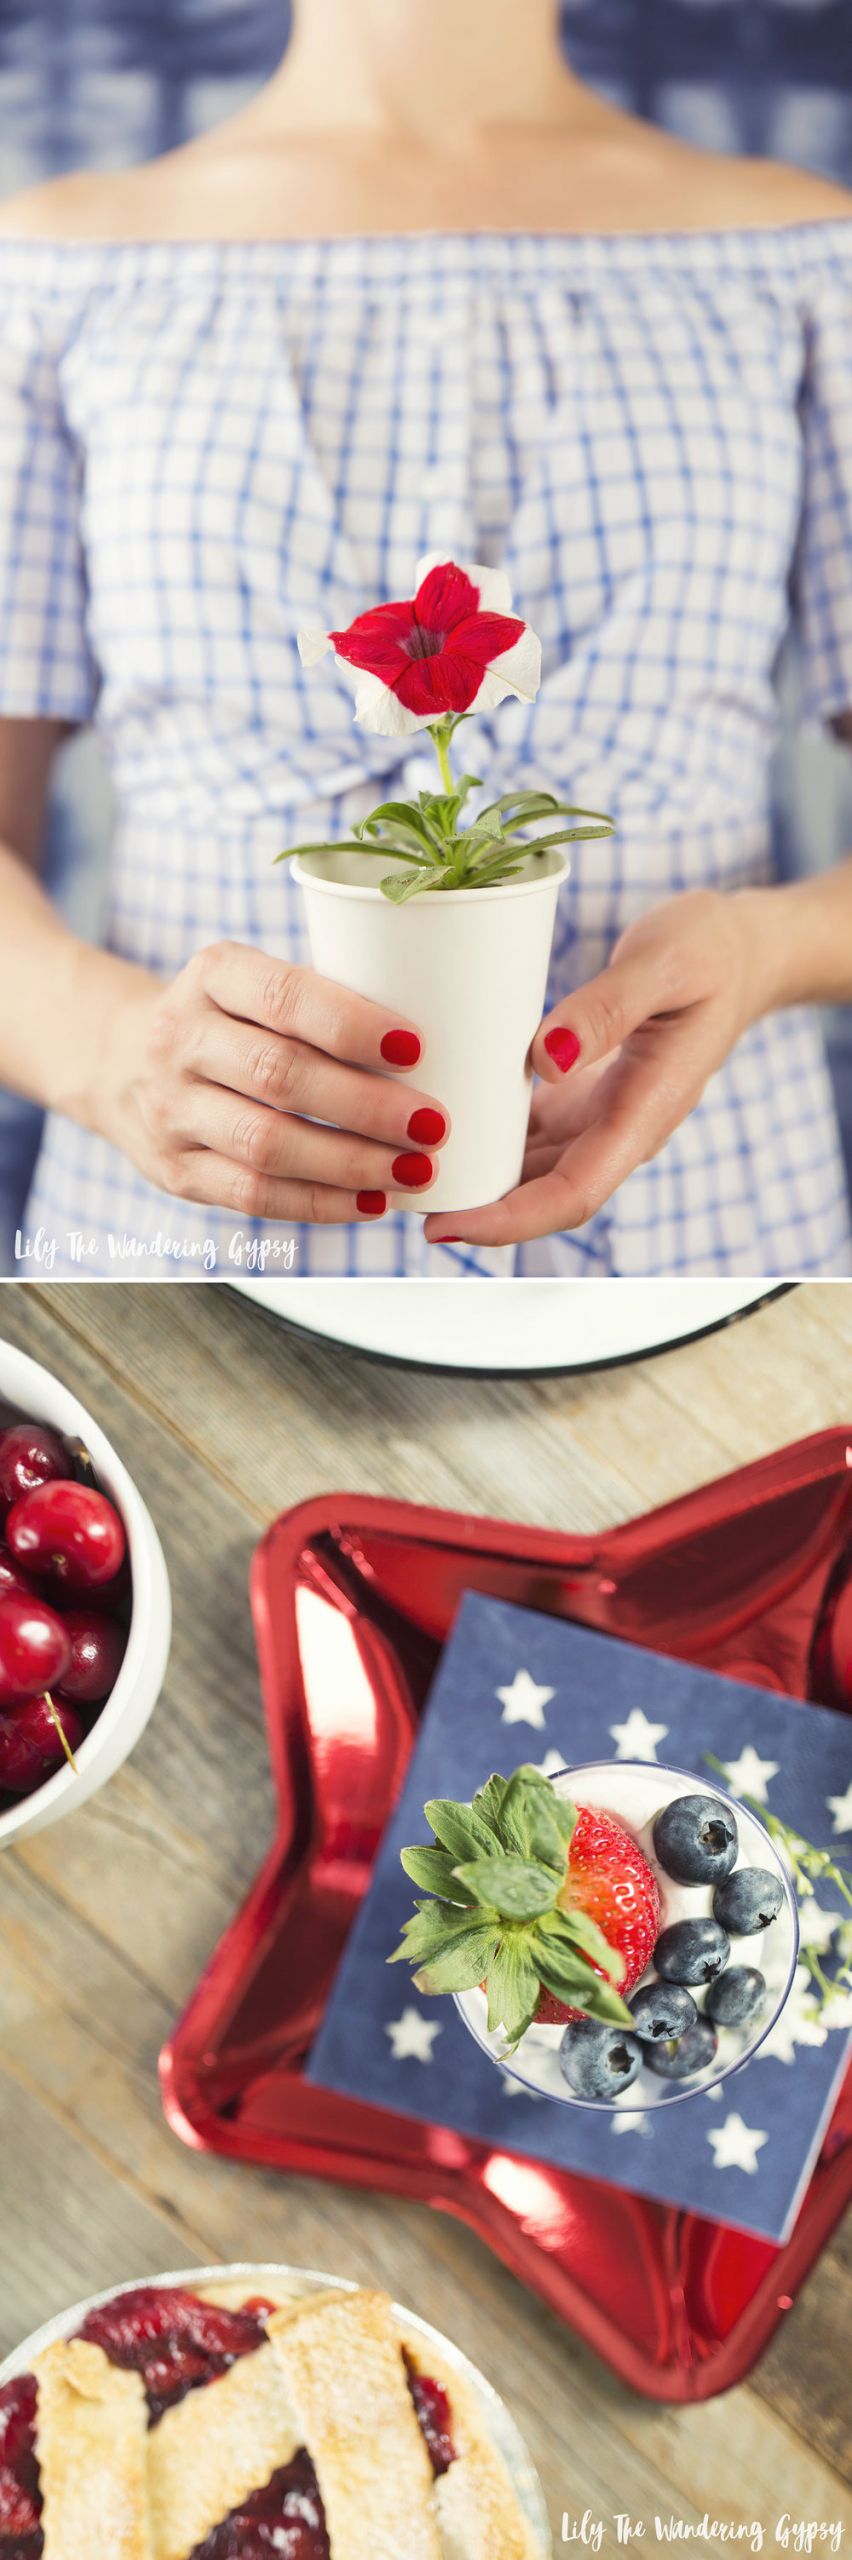 Memorial Day Party Ideas
 A Memorial Day Party With Balloon Time Get These Cute